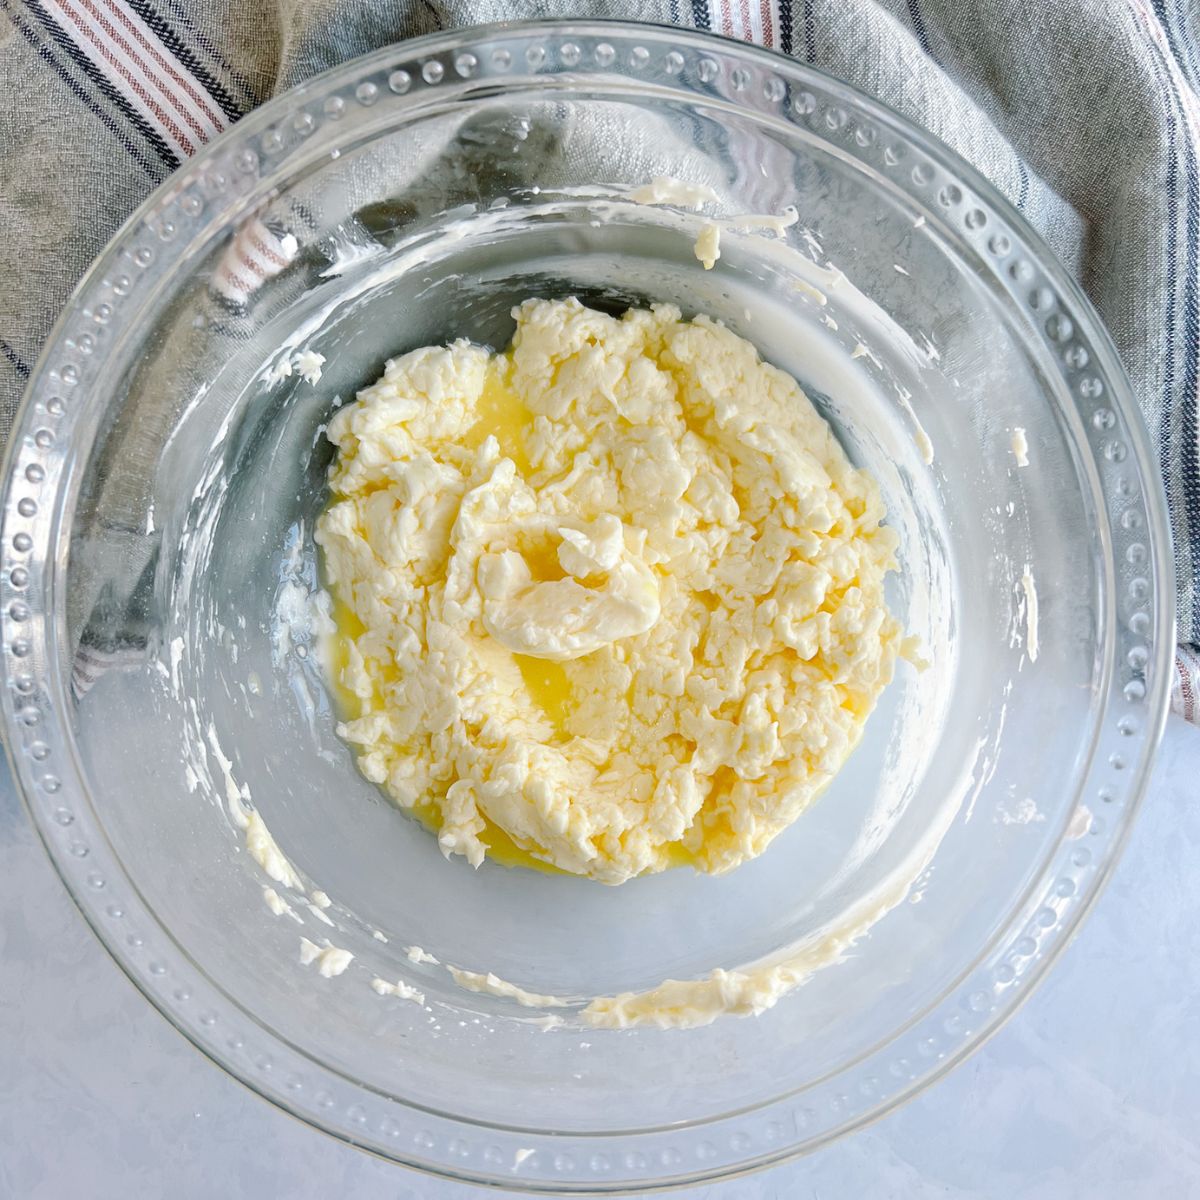 Step One: Cream the butter and sugar shown in a mixing bowl.